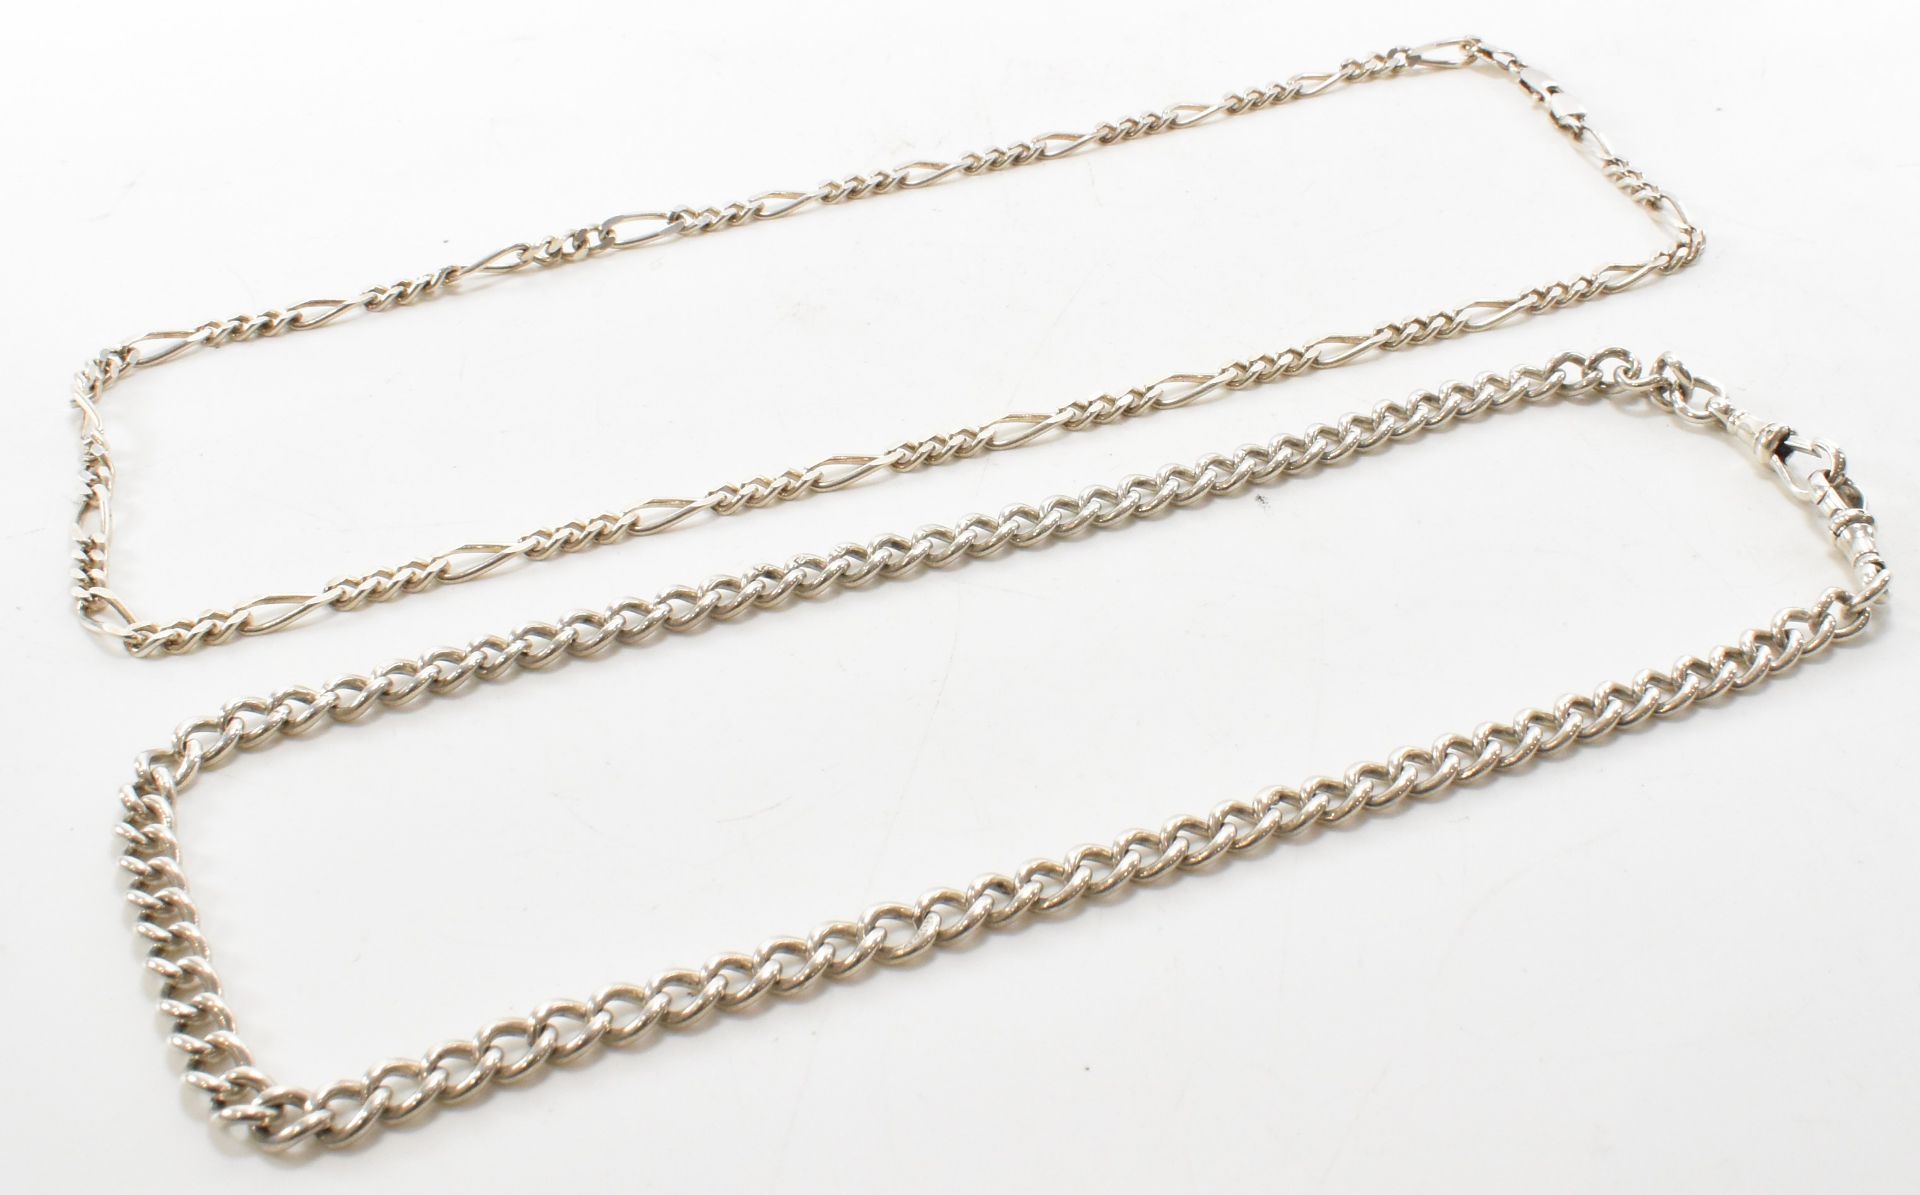 TWO SILVER NECKLACE CHAINS - Image 5 of 7